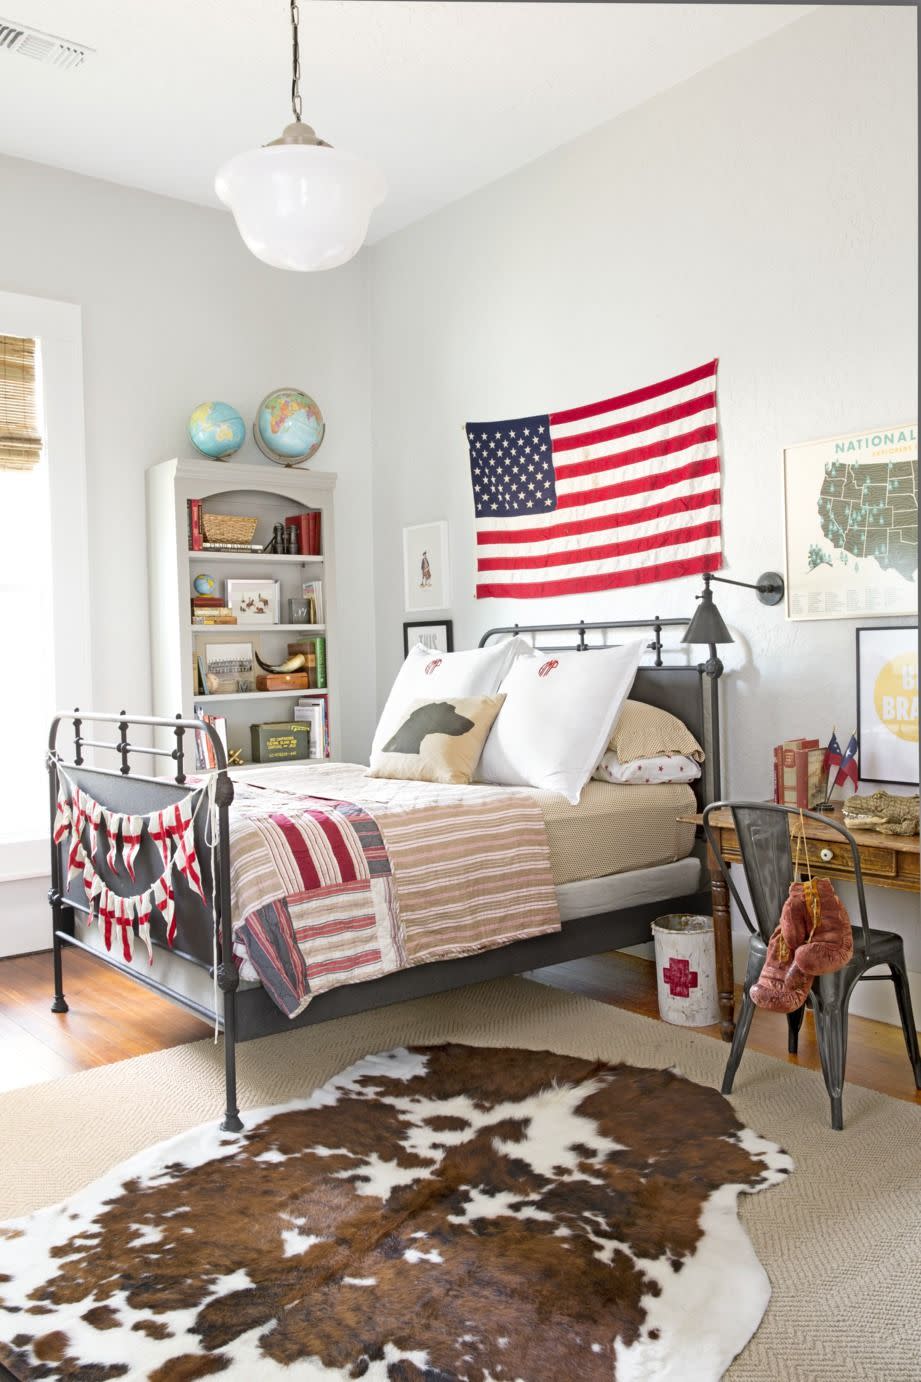 Hang Old Glory Above the Bed